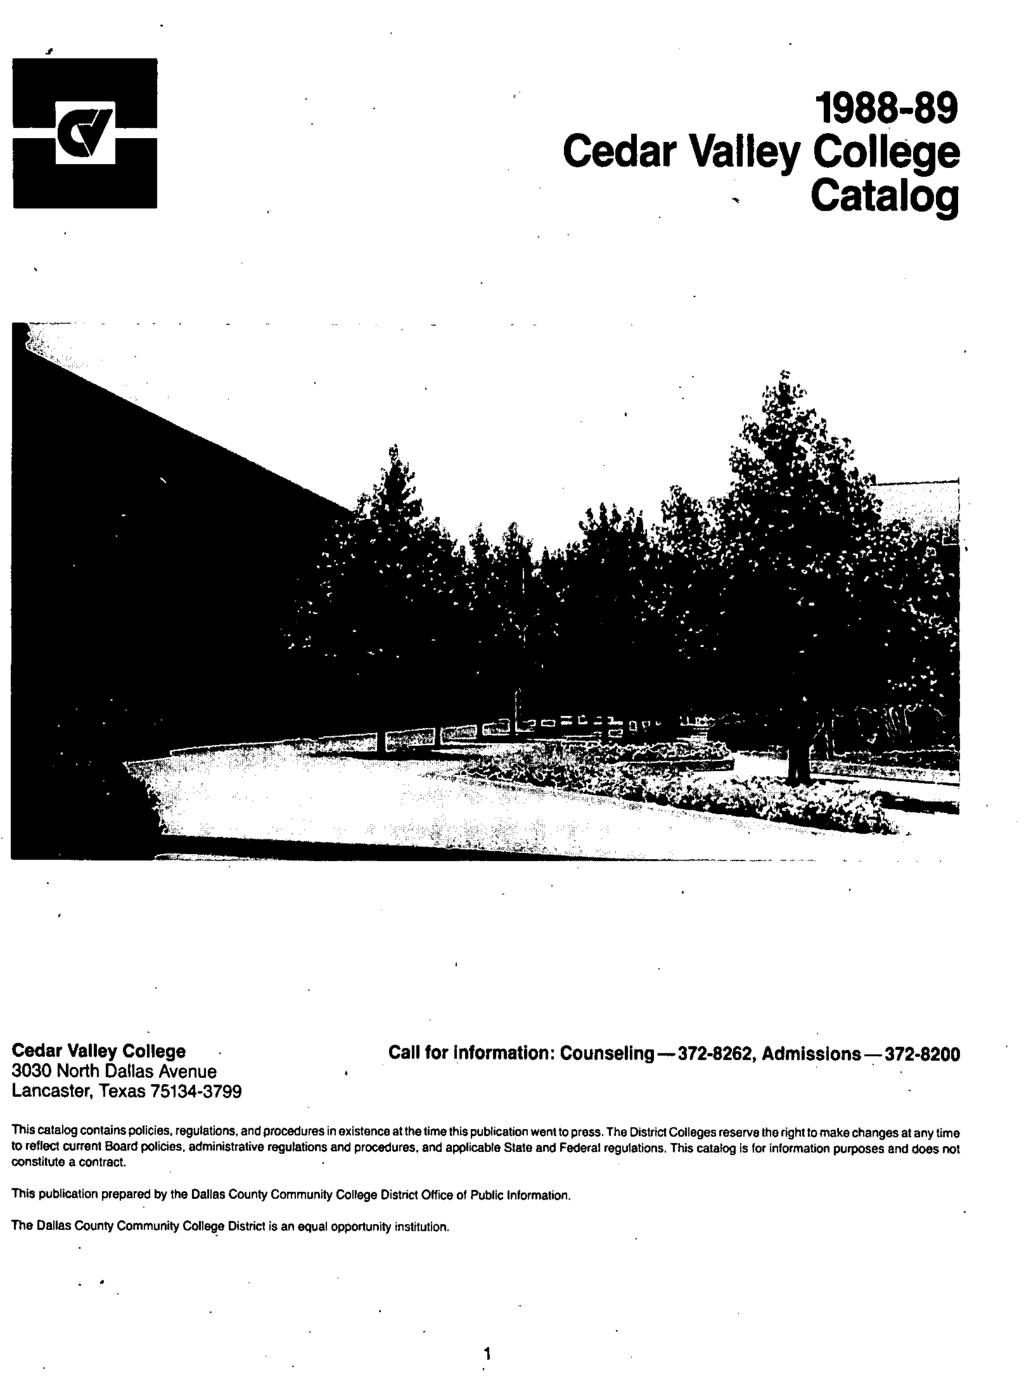 1988-89 Cedar Valley College ~ Catalog Cedar Valley College 3030 North Dallas Avenue Lancaster, Texas 75134 3799 Call for Information: Counsellng-372-8262, Admisslons-:-372-8200 This catalog contains